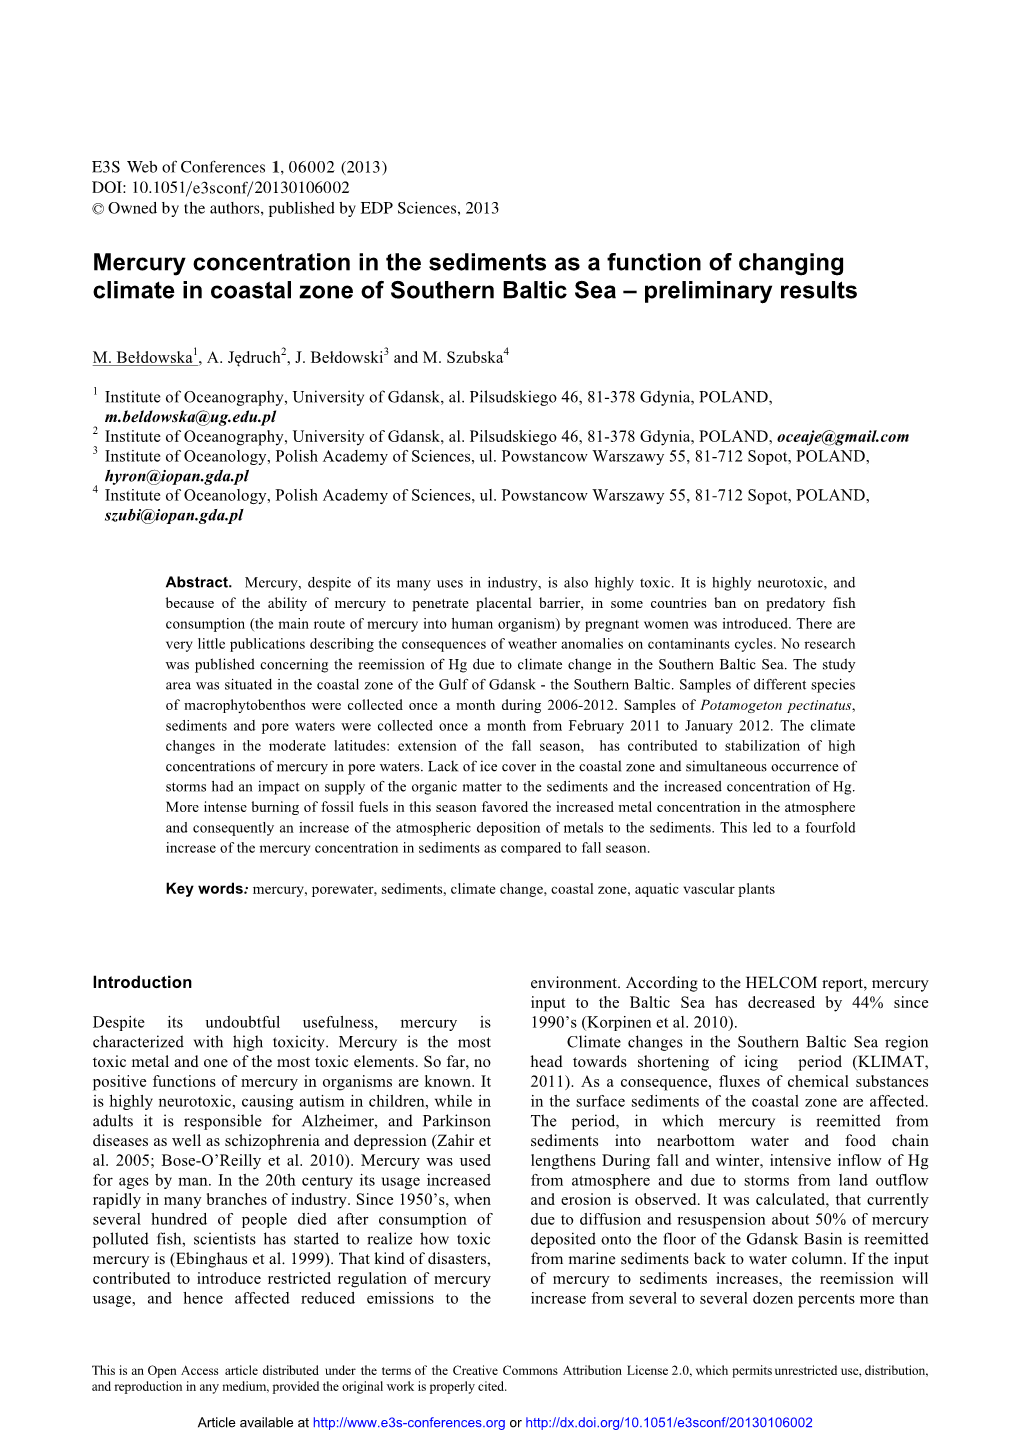 Mercury Concentration in the Sediments As a Function of Changing Climate in Coastal Zone of Southern Baltic Sea – Preliminary Results